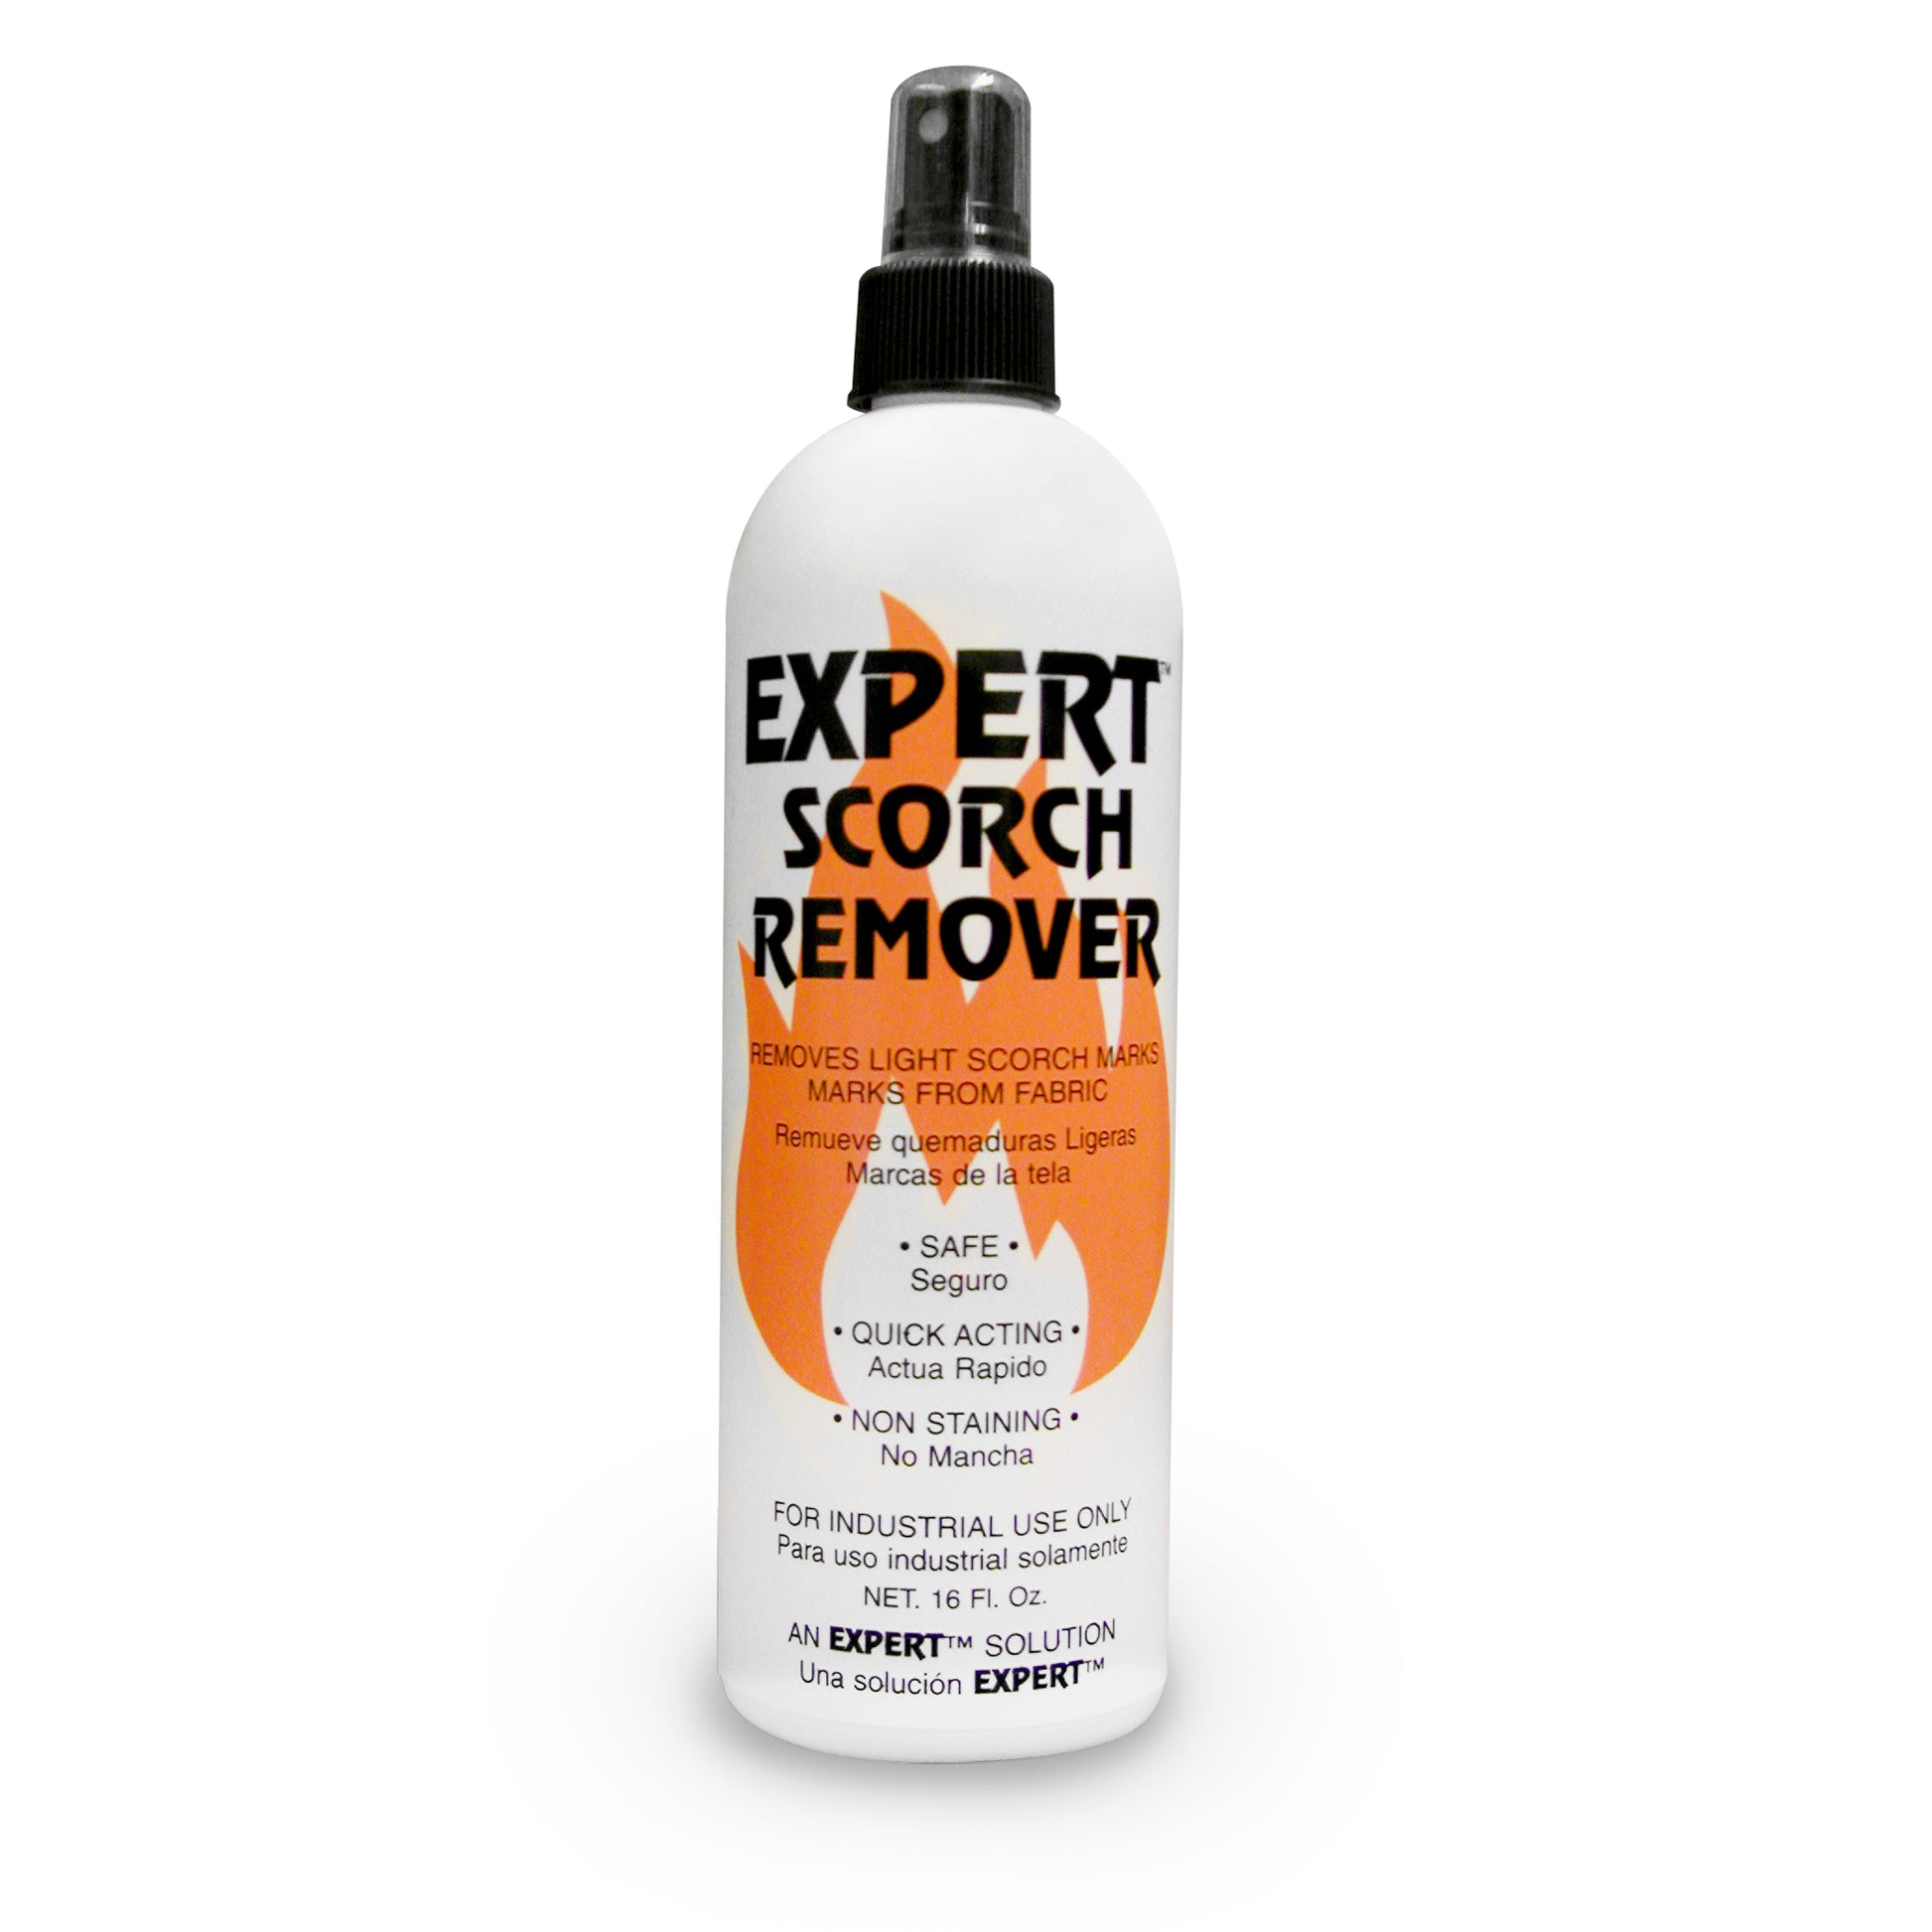 Expert Scorch Remover-Miscellaneous Chemicals & Solvents-Albatross Lawson Screen & Digital Products dtf printer screen printing direct to fabric equipment machine printers equipment dtg printer screen printing direct to garment equipment machine printers